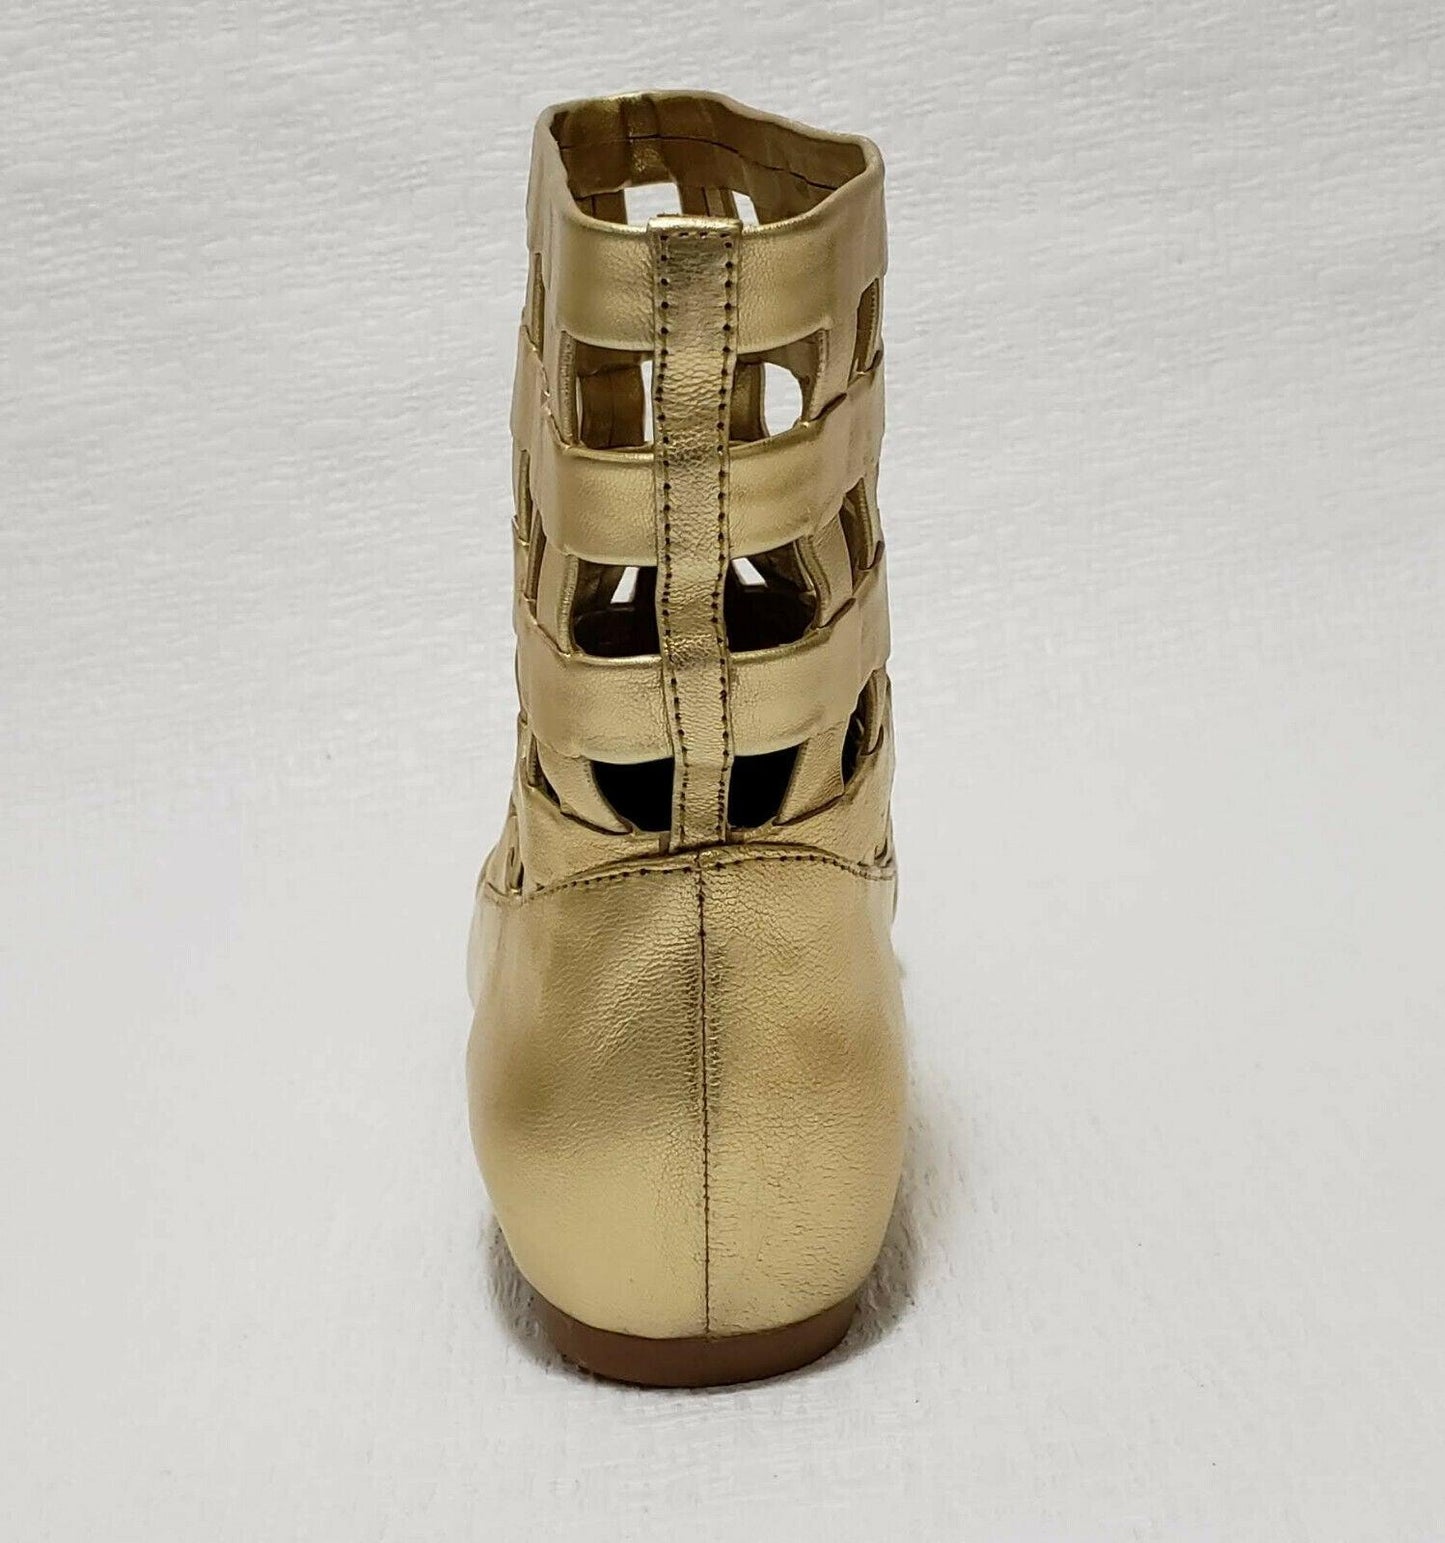 Jeffrey Campbell  Bueller Metallic Gold Womens Fashion Leather Ankle Booties US 7 - SVNYFancy